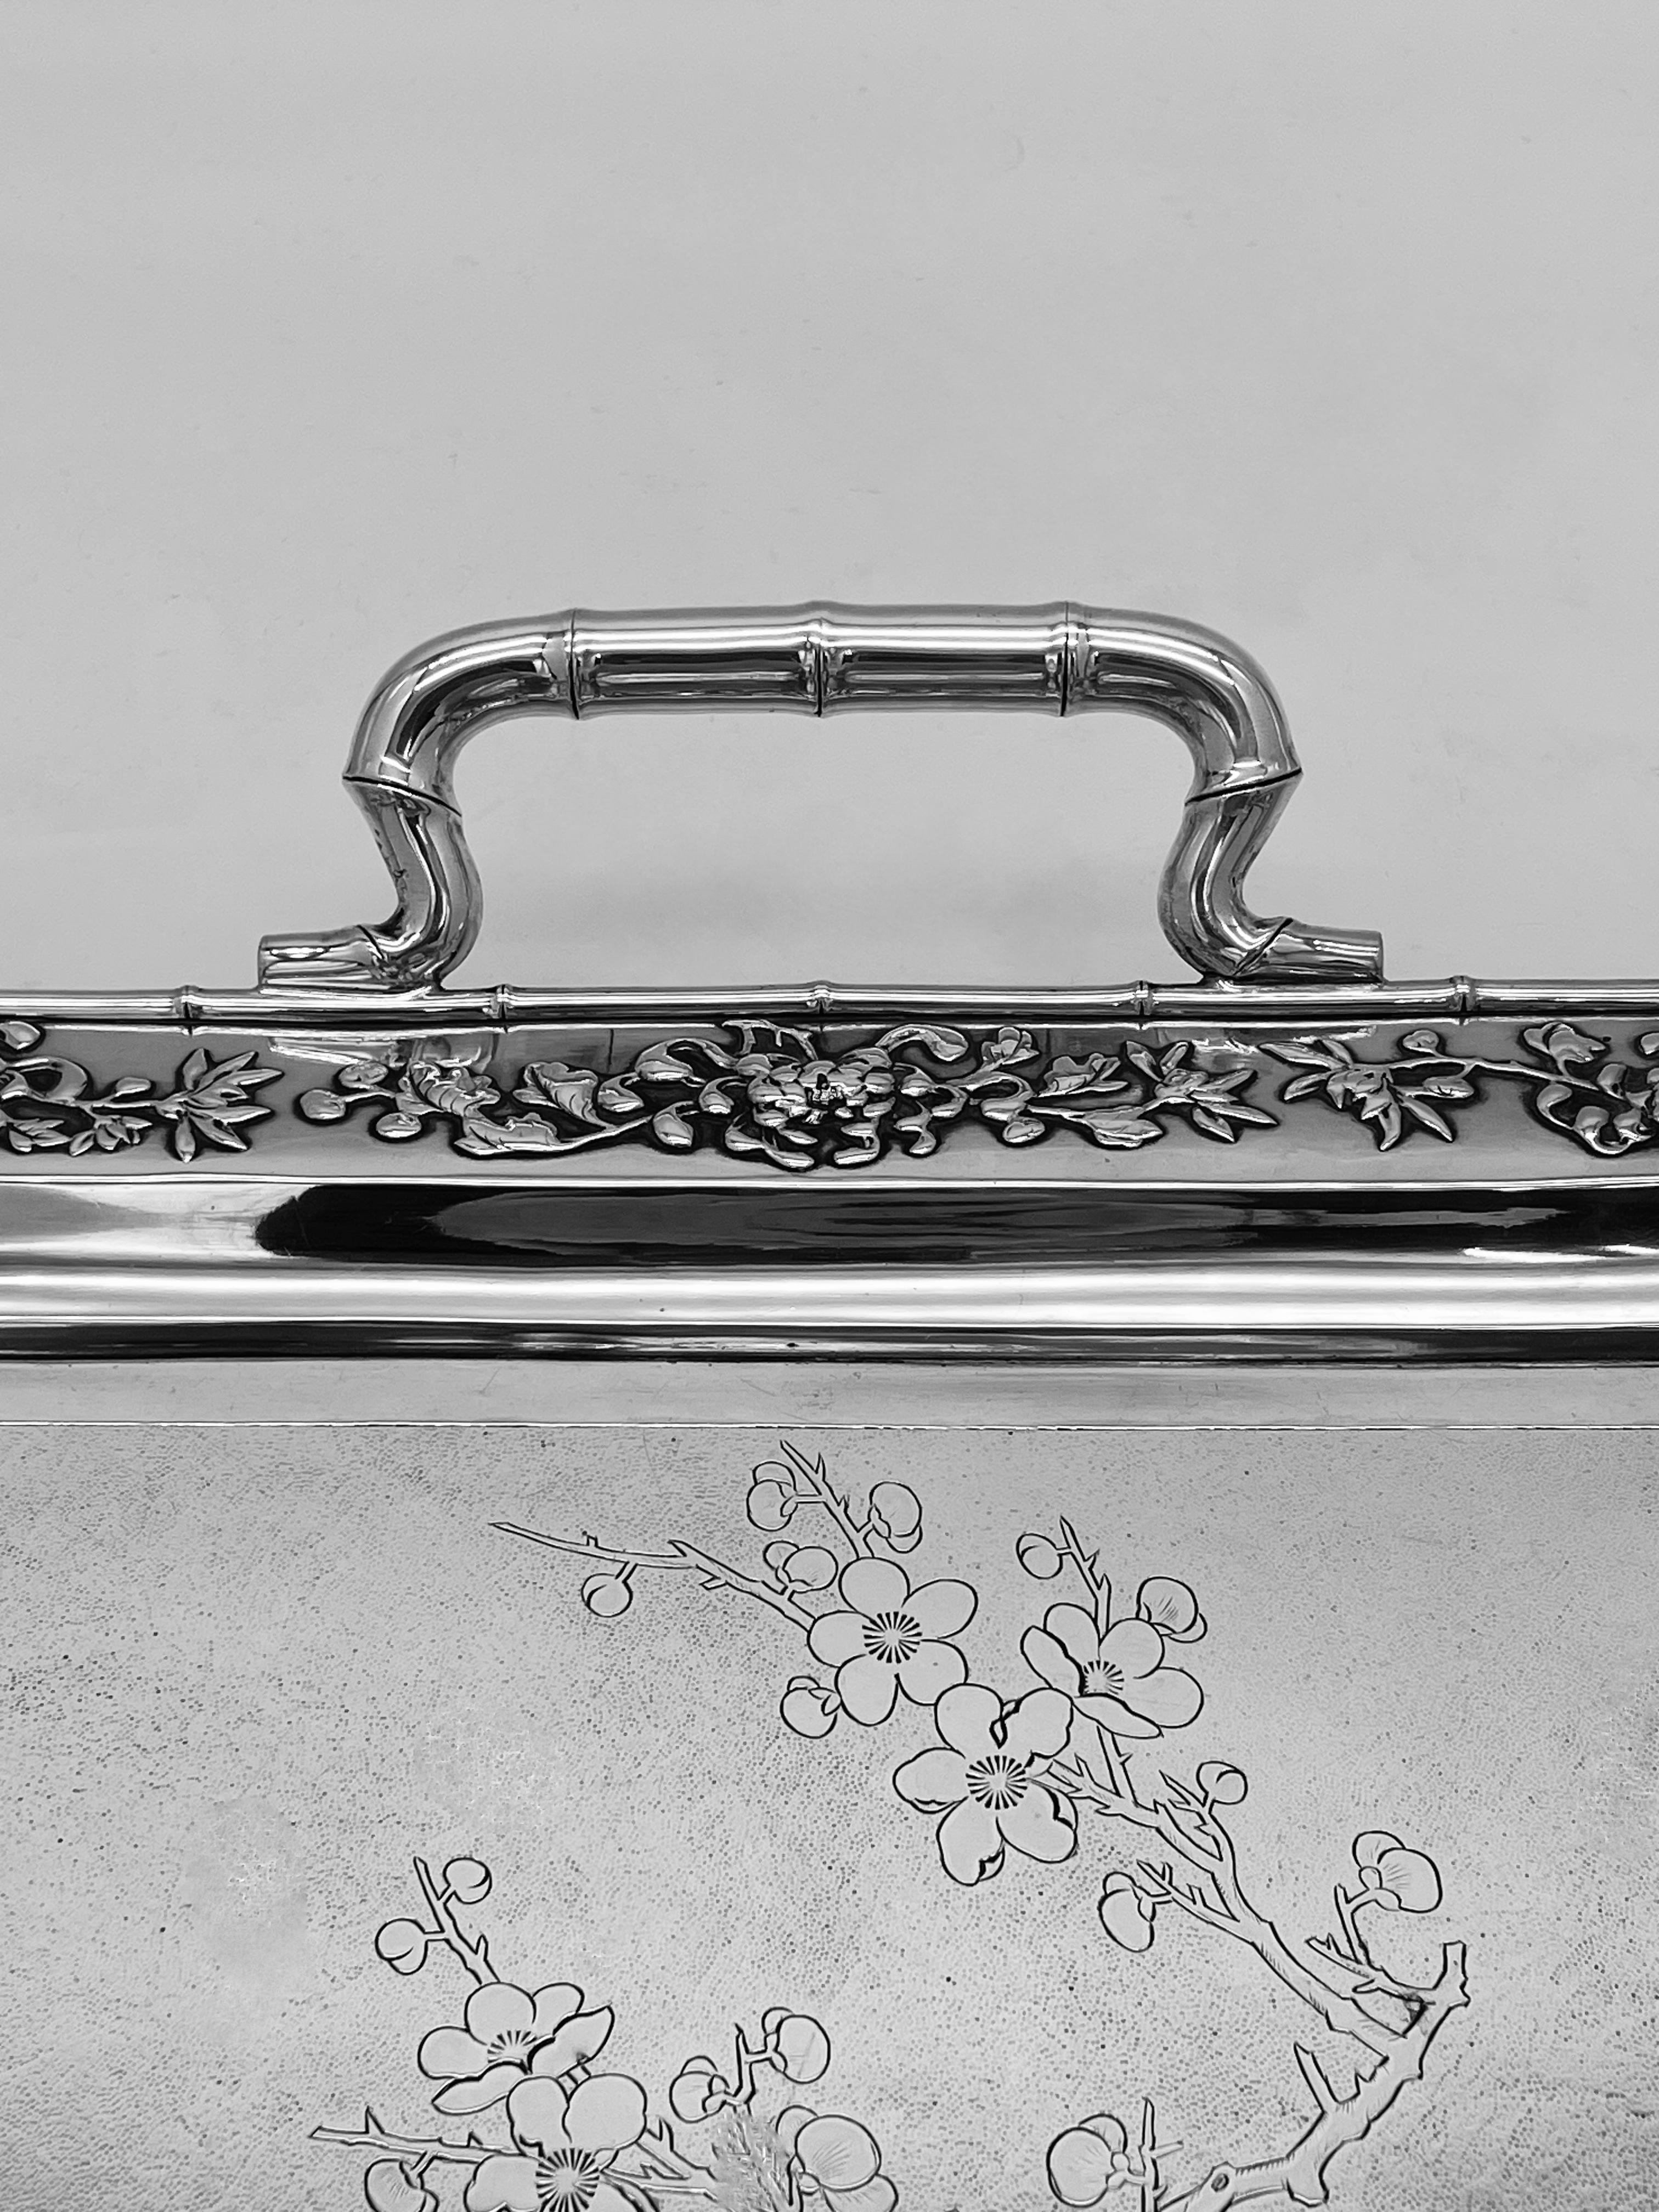 A Chinese Export Silver Tray engraved with prunus on a matte background, with applied chrysanthemum decoration to the border, and with two bamboo shaped handles. The tray was made by '紹記' (Shao Ji) for the retailer Luen Wo in Shanghai, circa 1895.